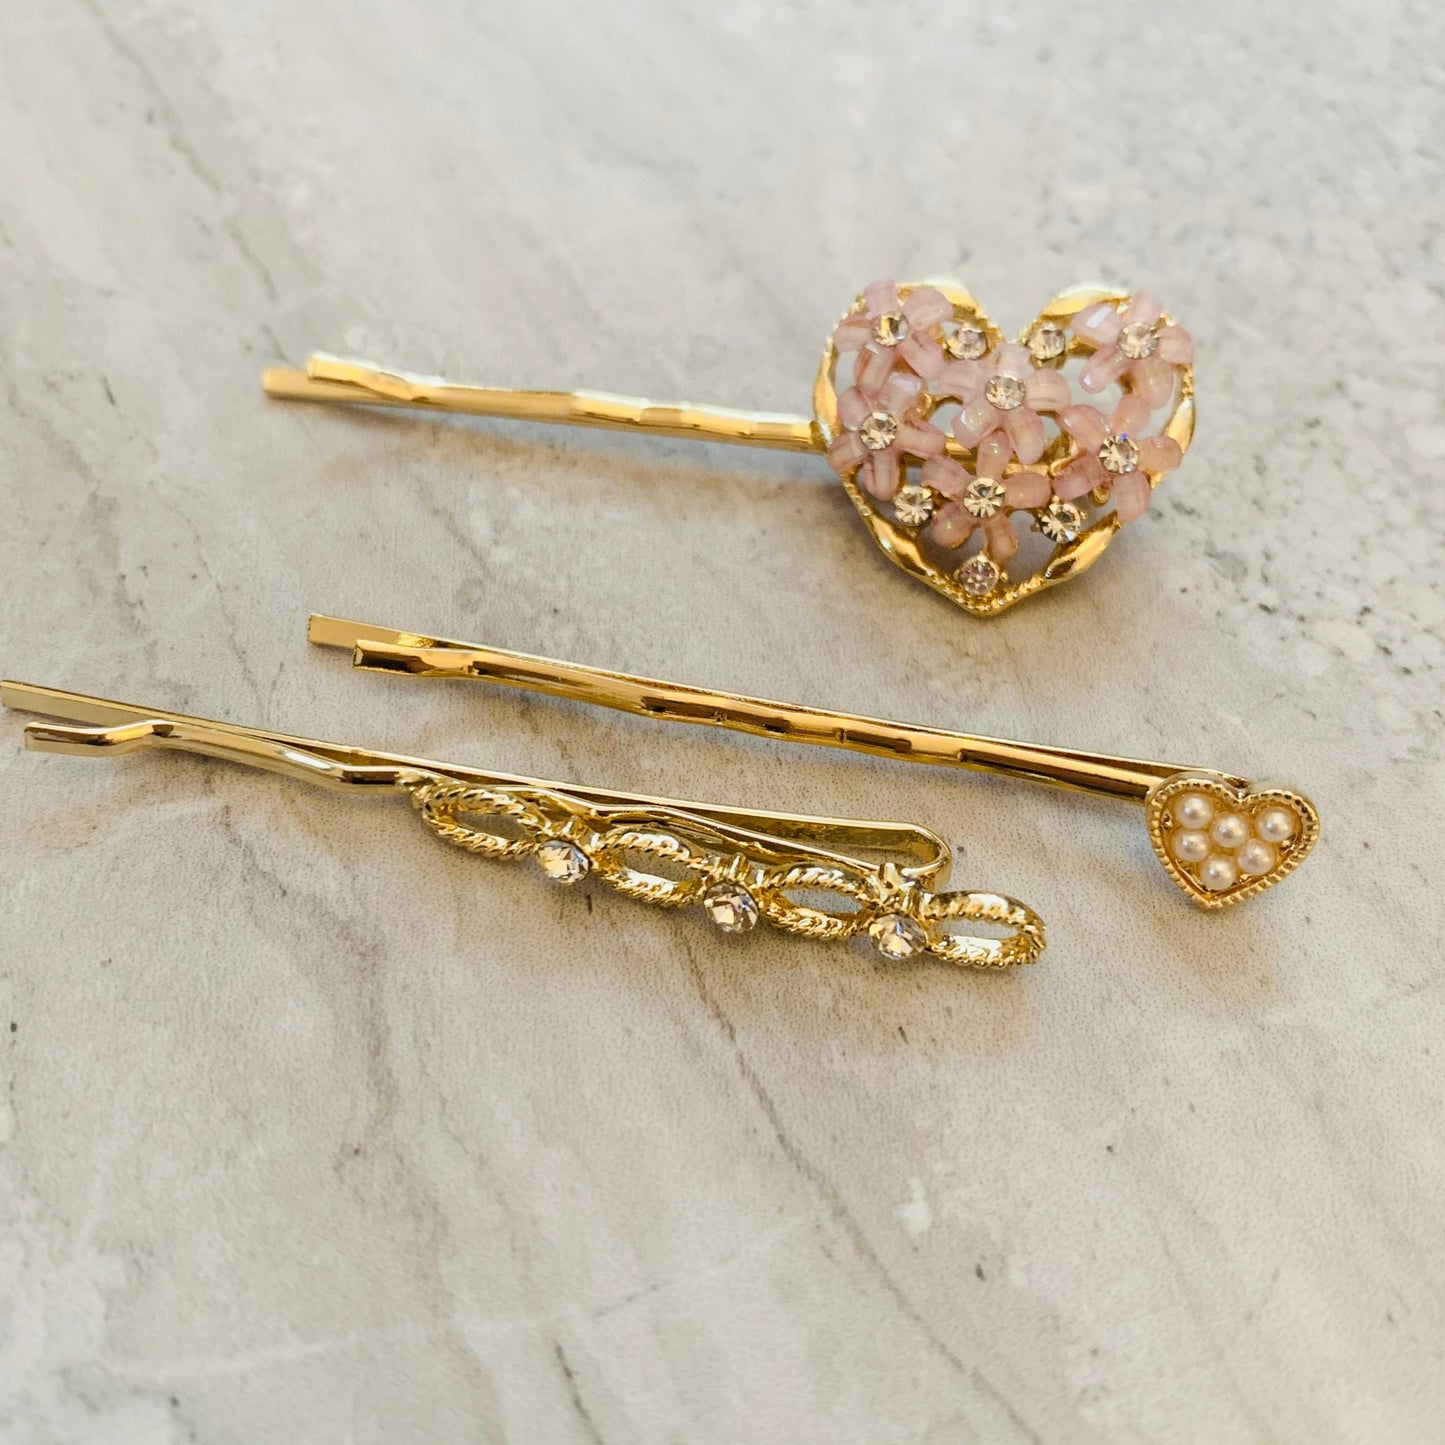 Vintage inspired hair clips